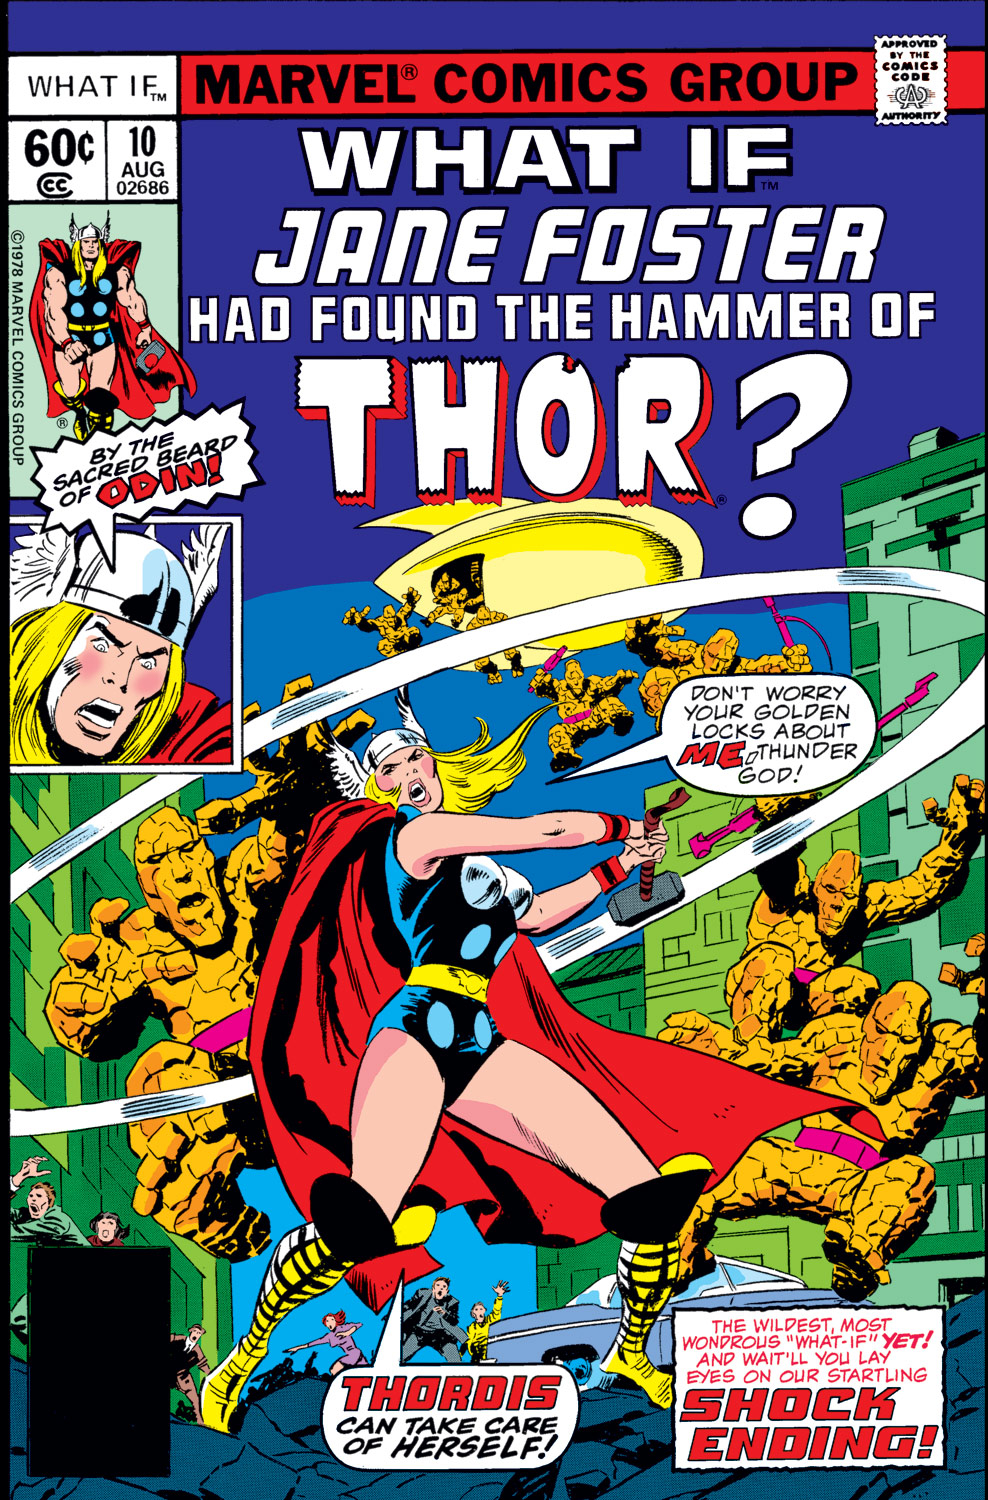 What If? (1977) 10_-_Jane_Foster_had_found_the_hammer_of_Thor Page 1